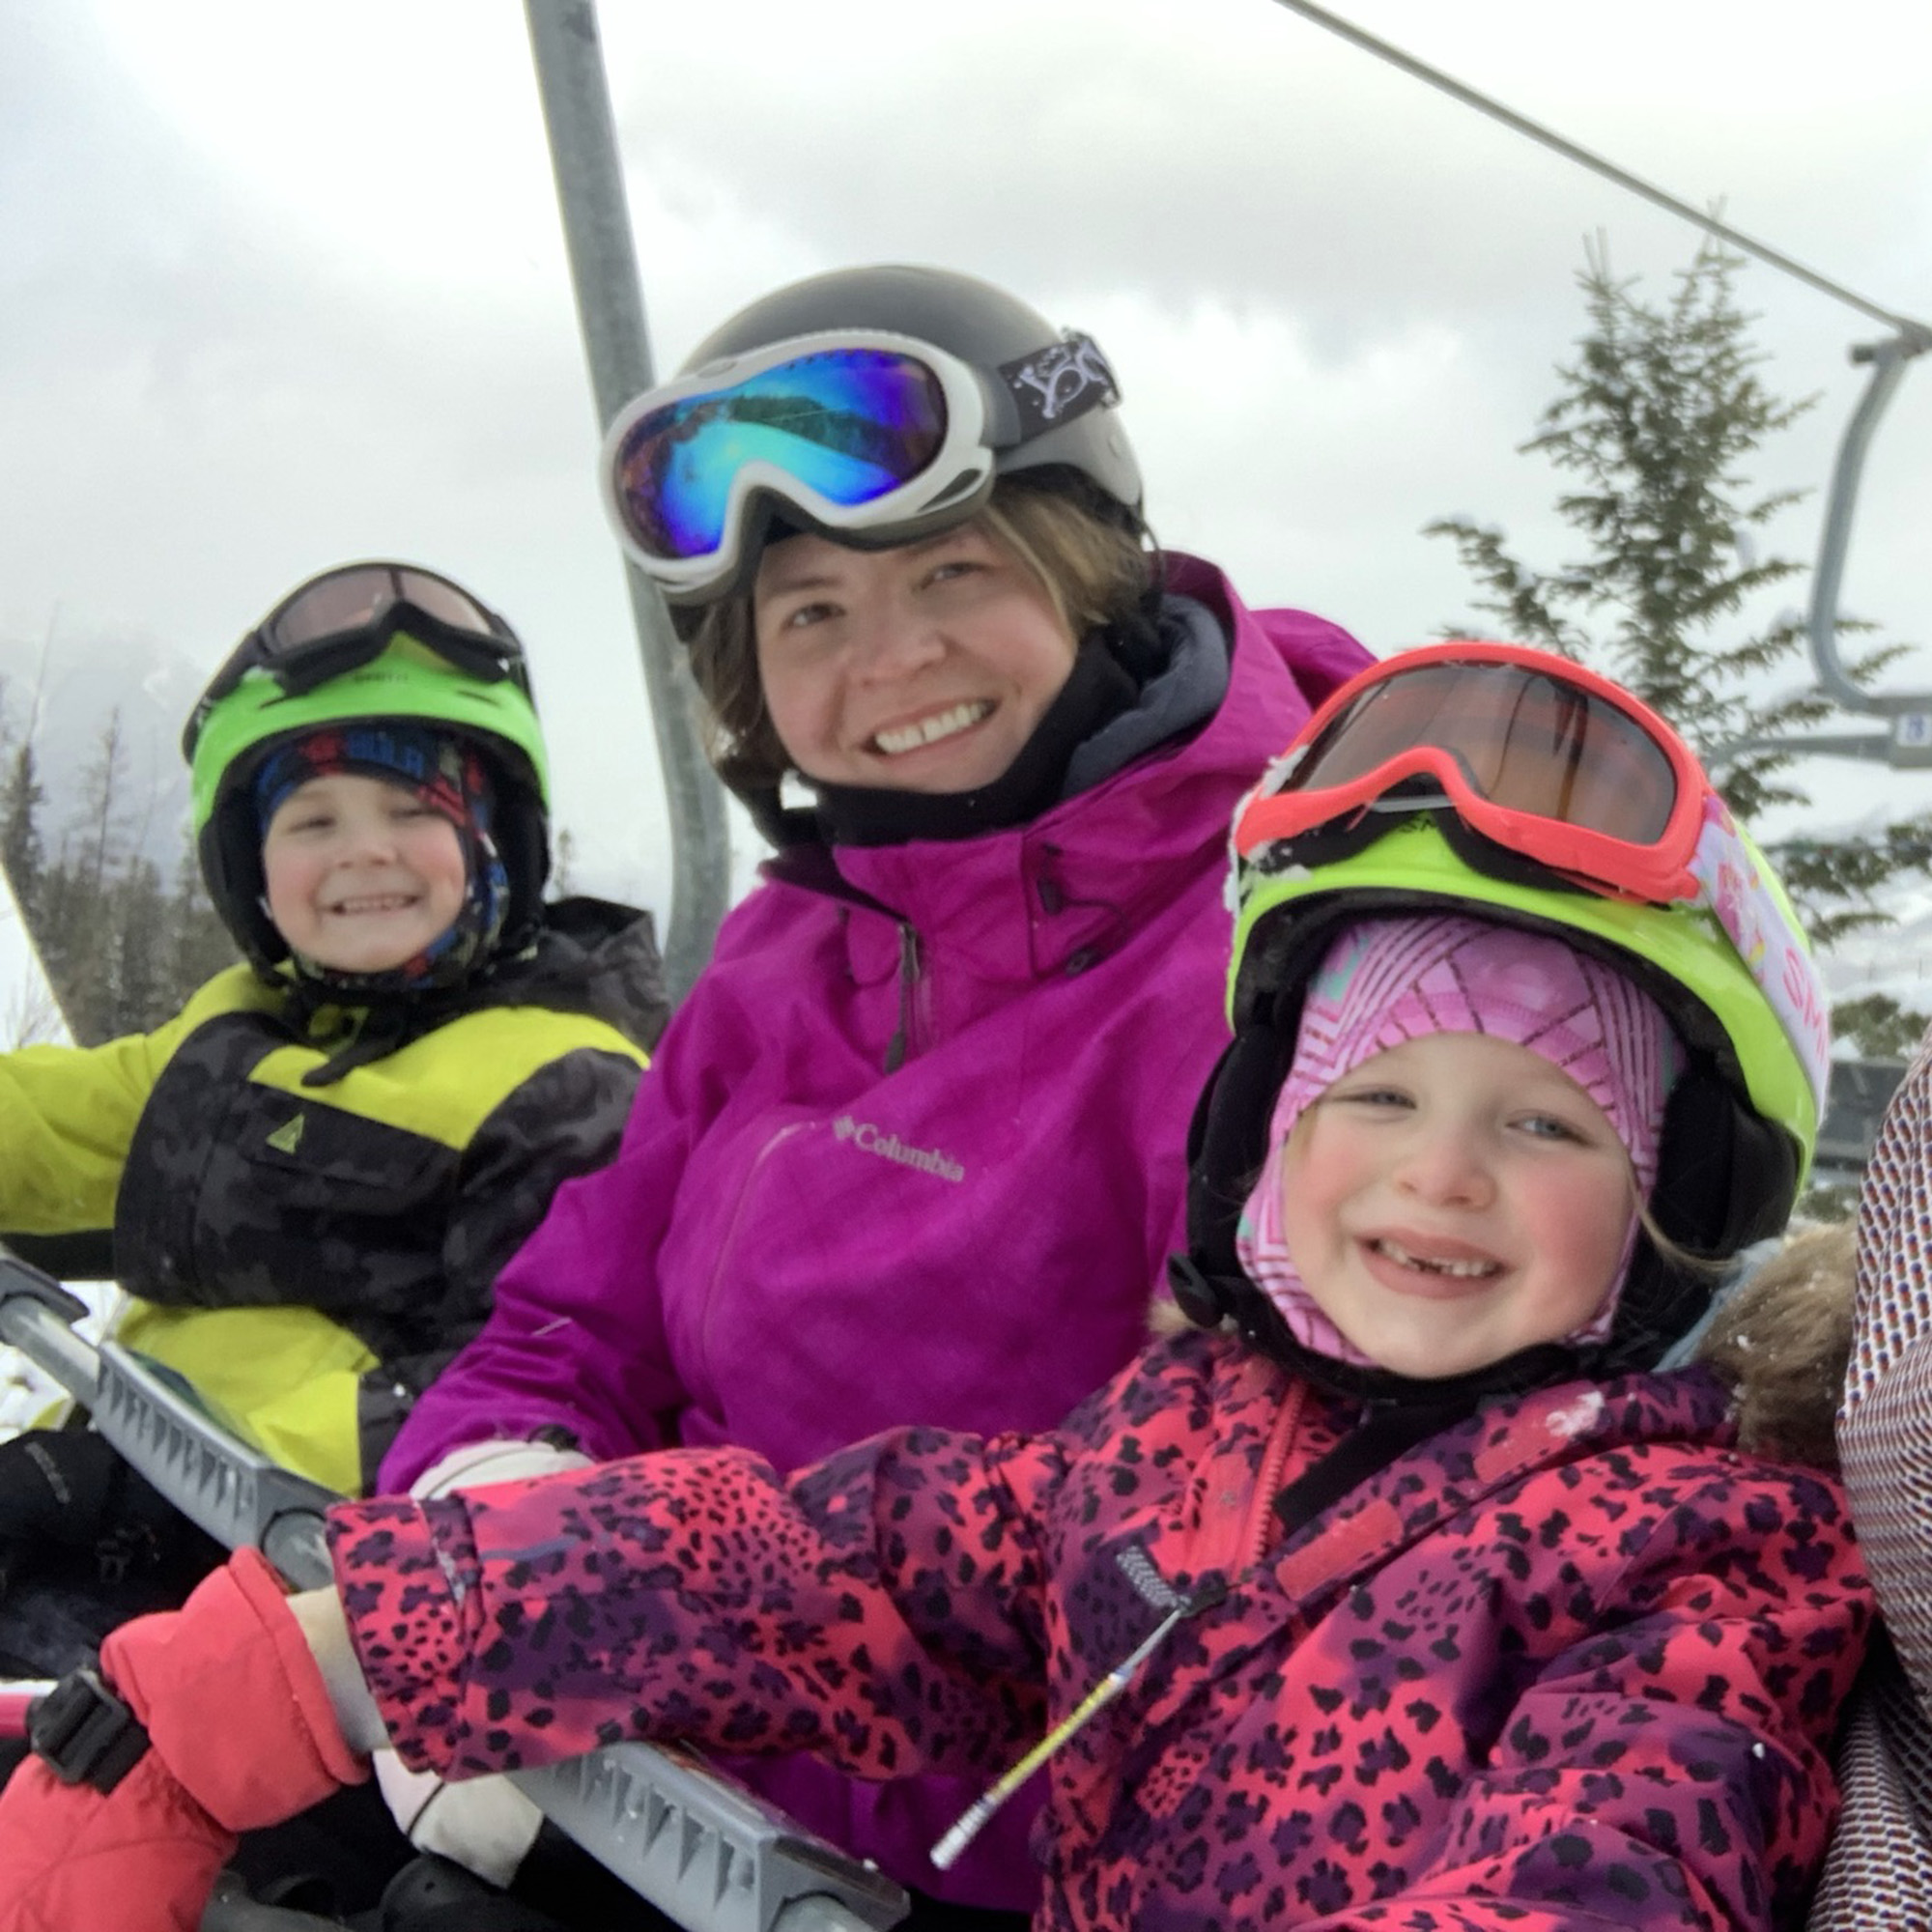 Jo and her kids on a chairlift while skiing